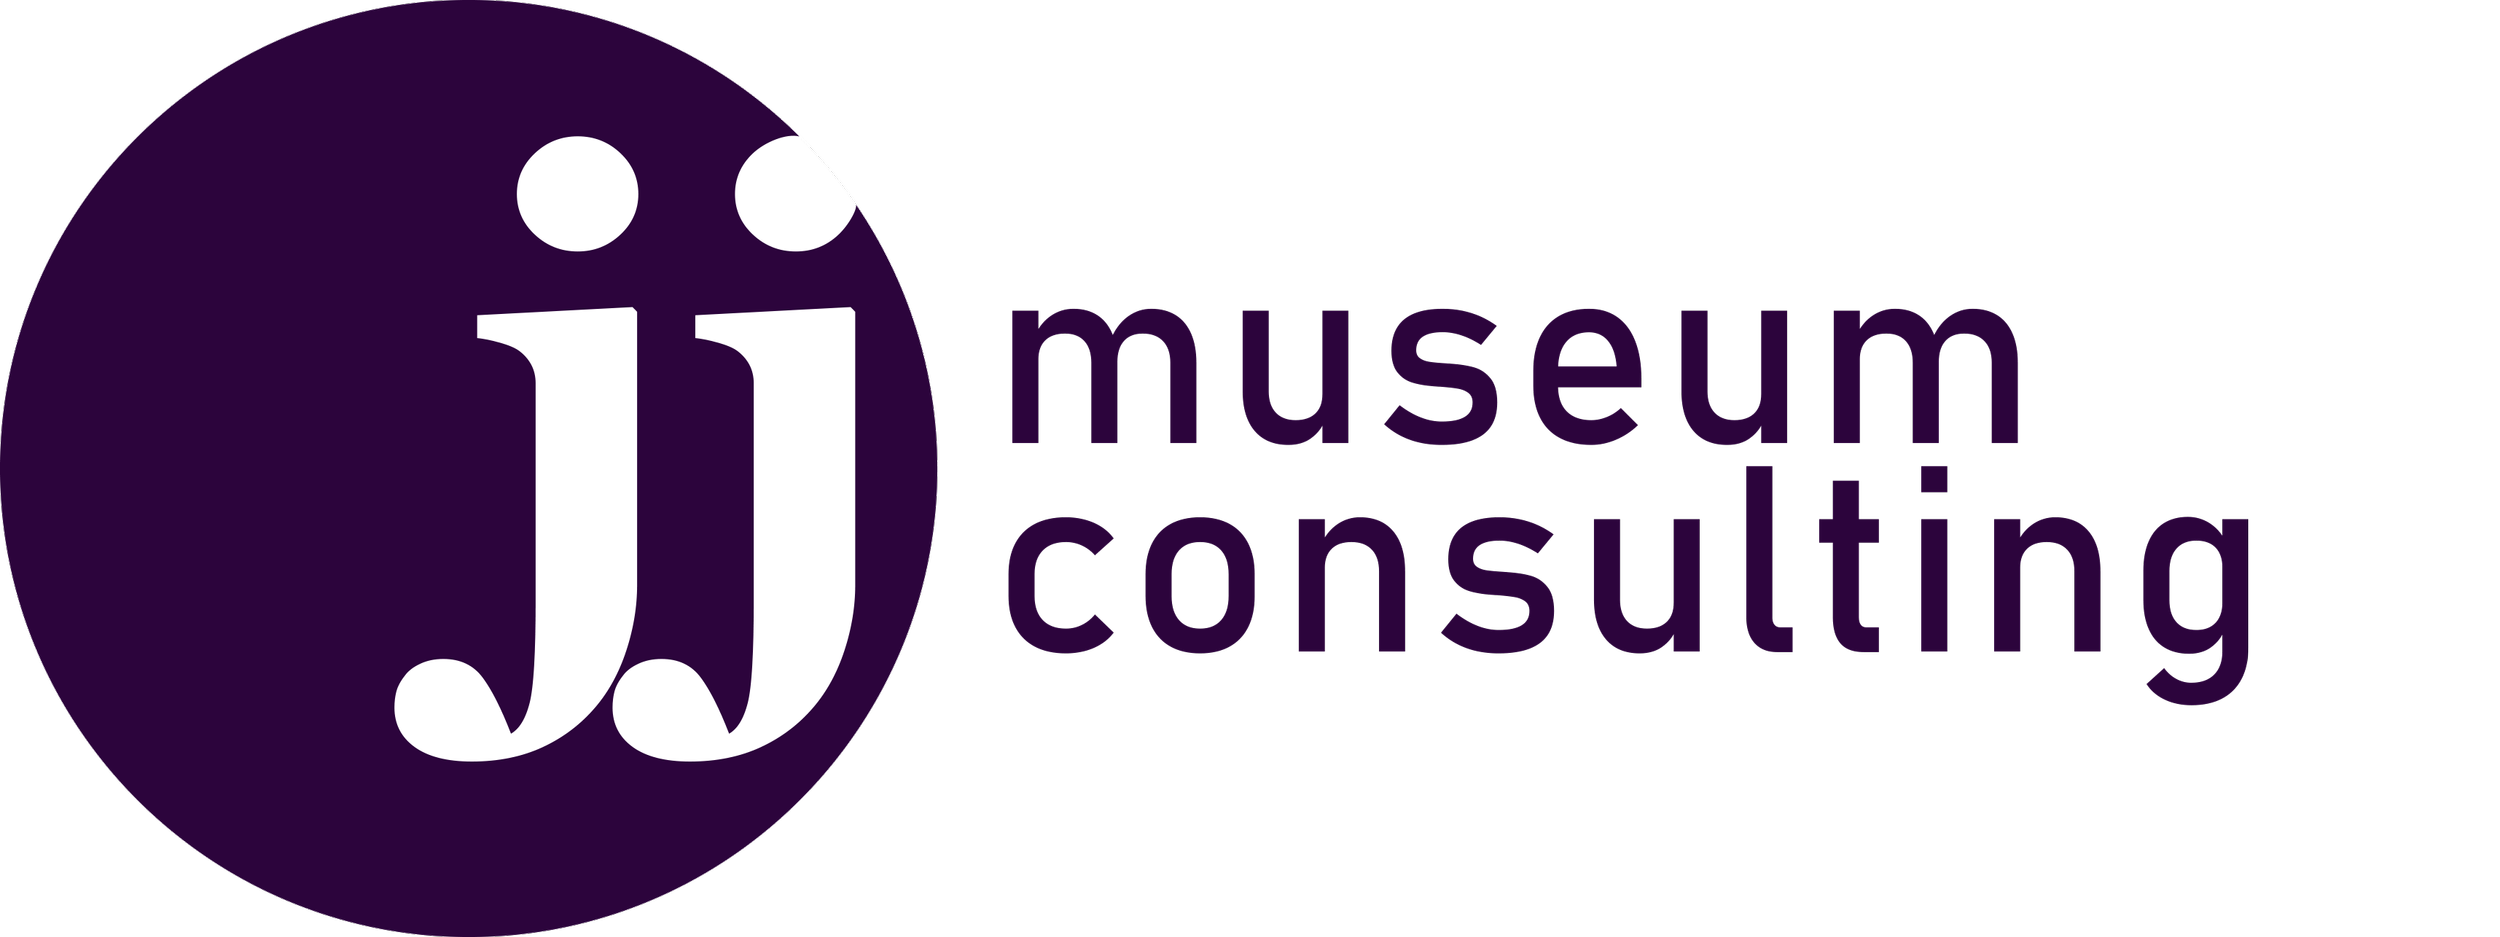 jj_consulting_logo2022.png